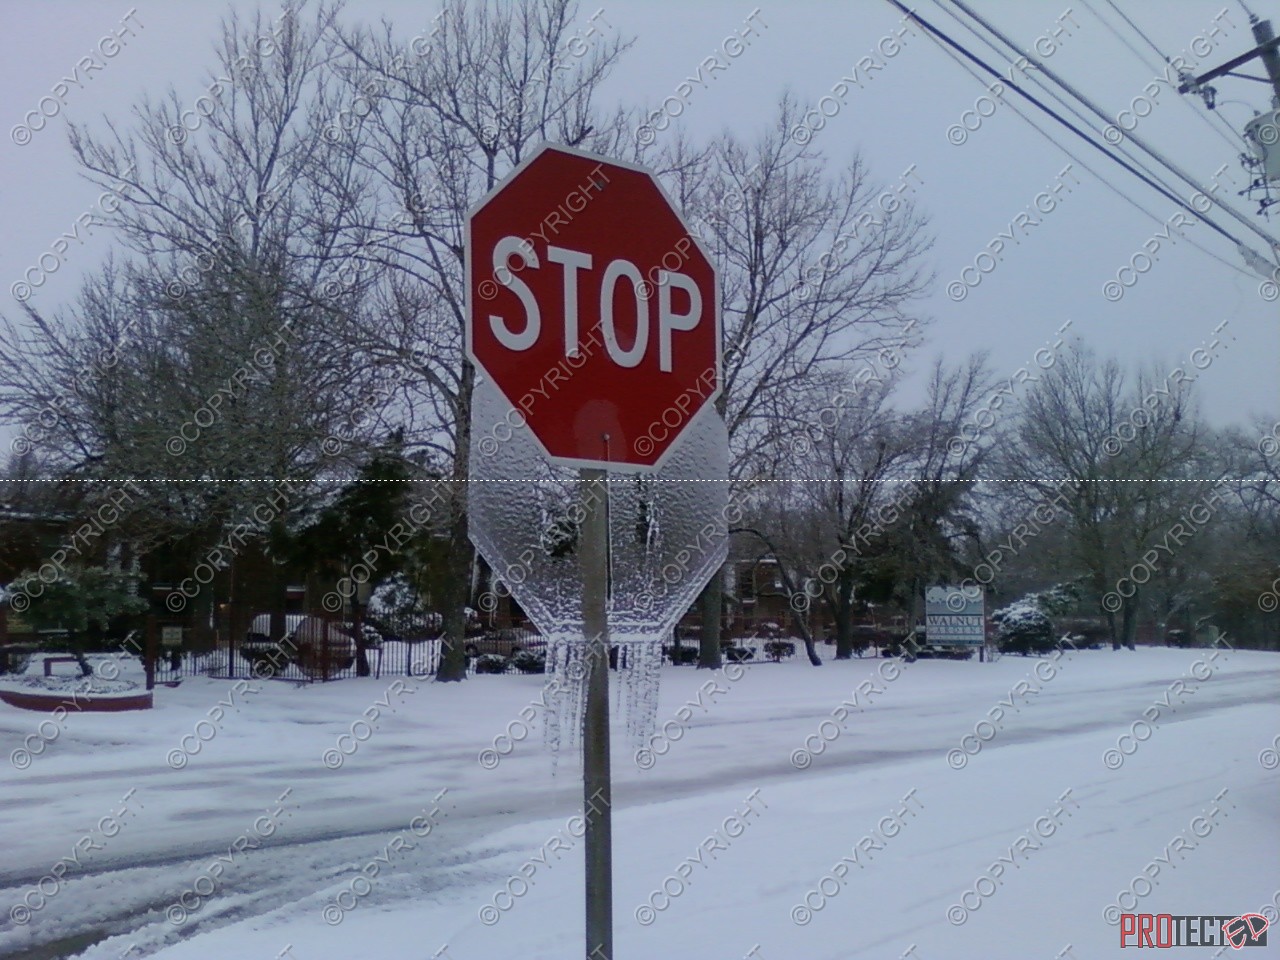 This is a stopsign that I took a picture of it on January 31,2010